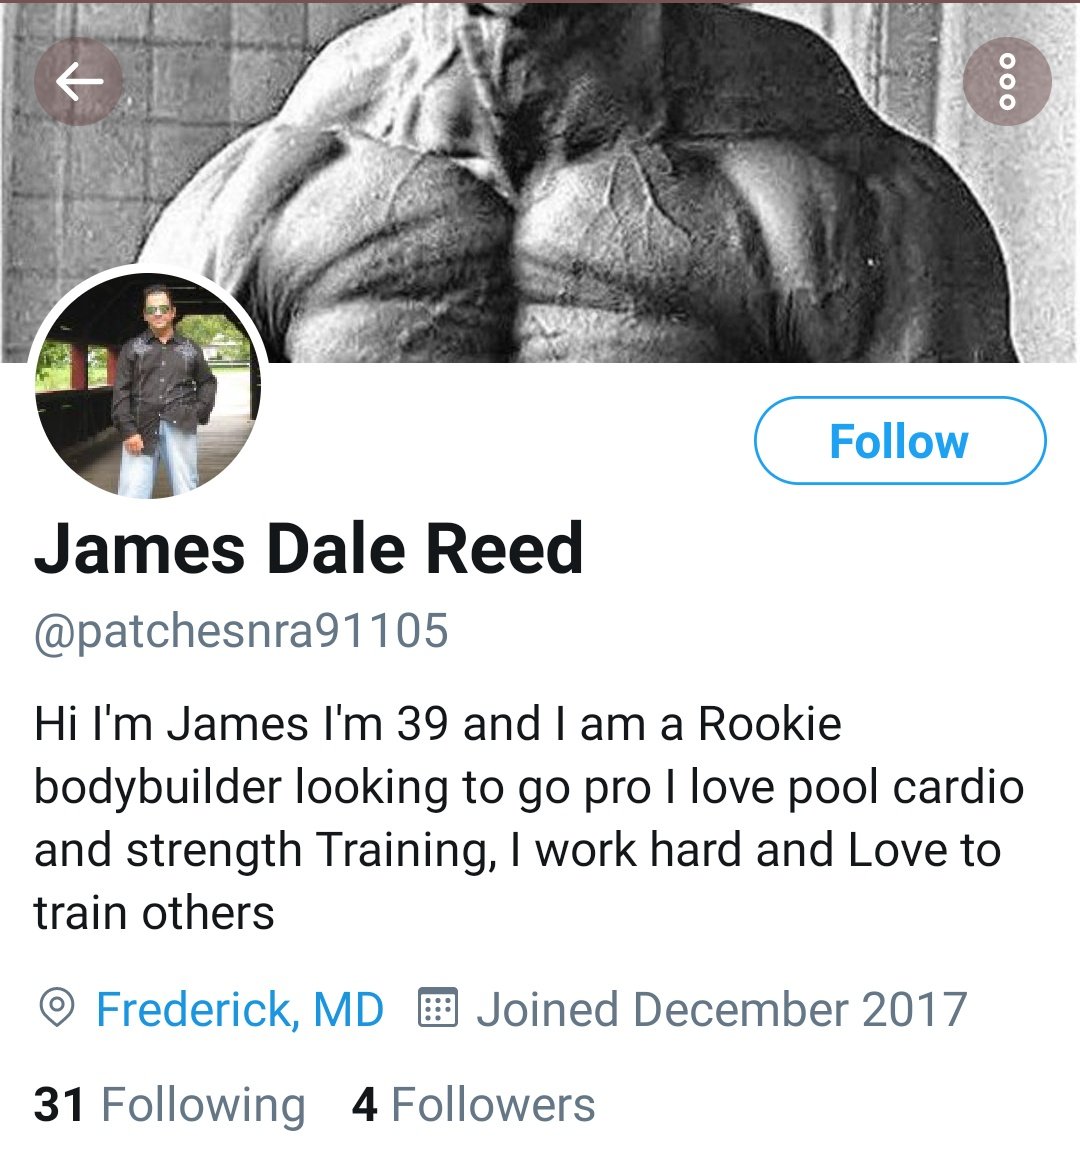 James Dale Reed, 42, of Frederick, Maryland, appears to have set up and then abandoned Twitter account  @patchesnra91105 in 2017. That account belongs to a body builder and Trump supporter.